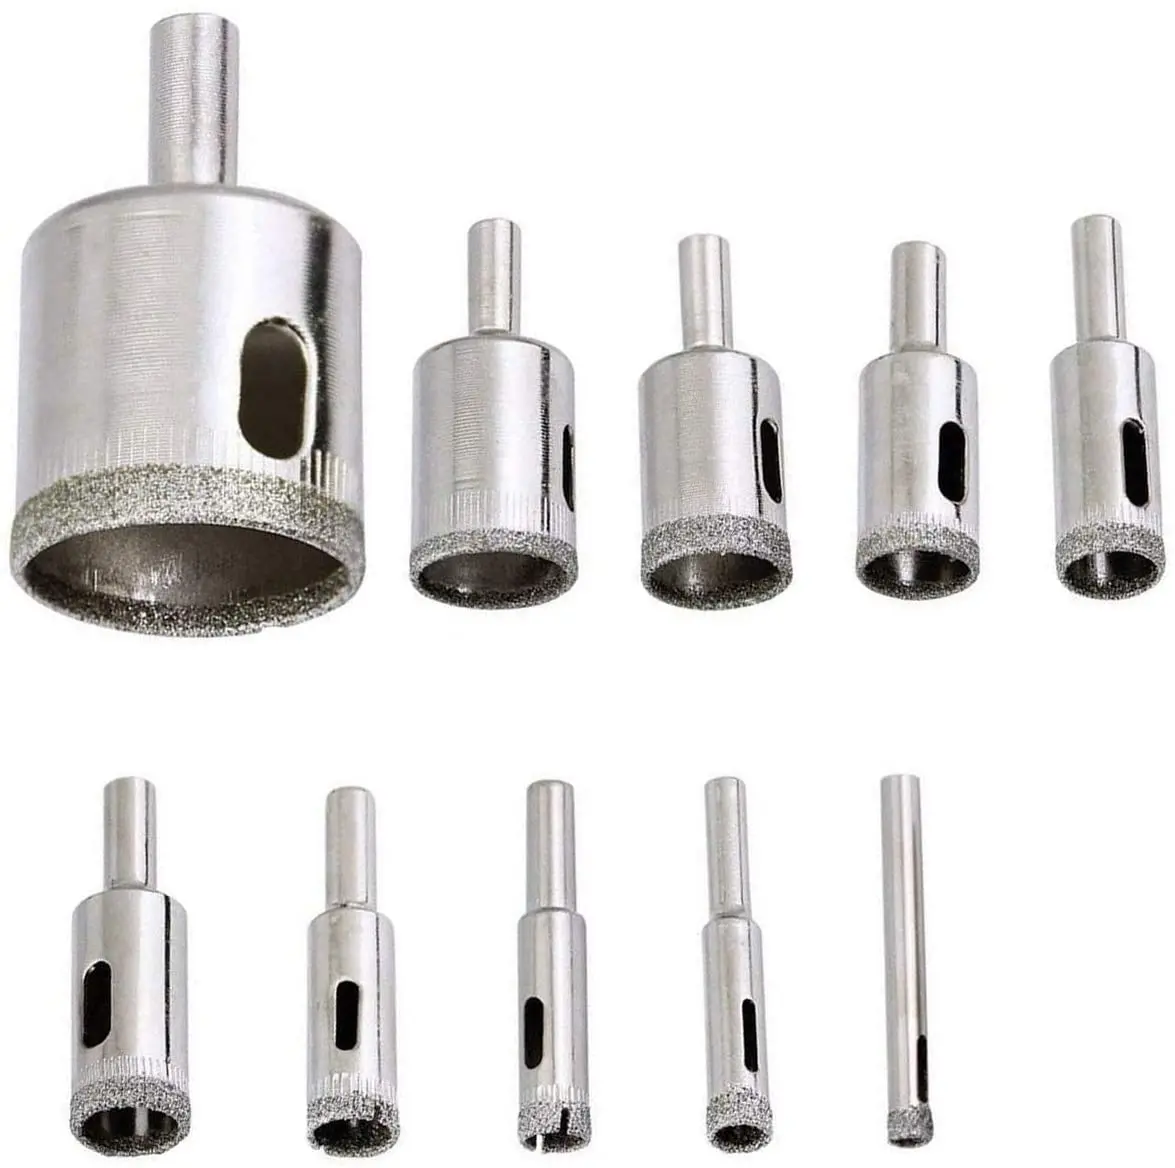 

10pcs Diamond Coated Hss Drill Bit Set Tile Marble Glass Ceramic Hole Saw Drilling Bits For Power Tools 6mm-30mm